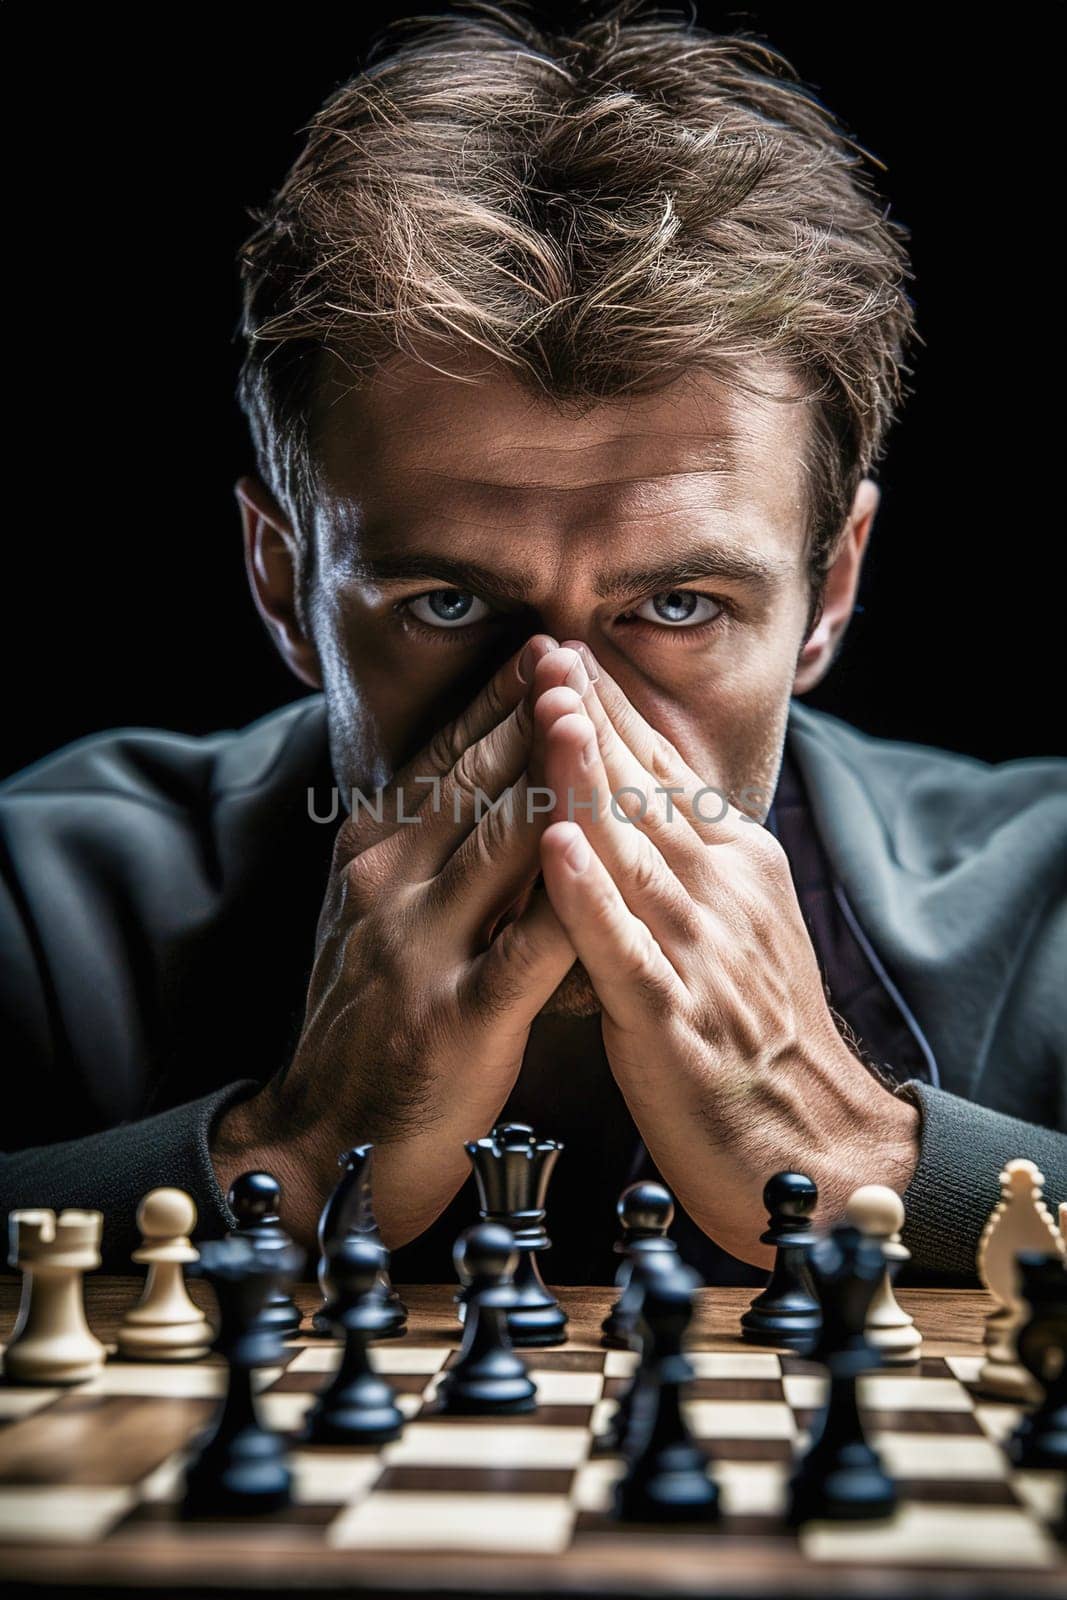 Portrait of a grown man playing chess. A serious look. Close-up. by Yurich32